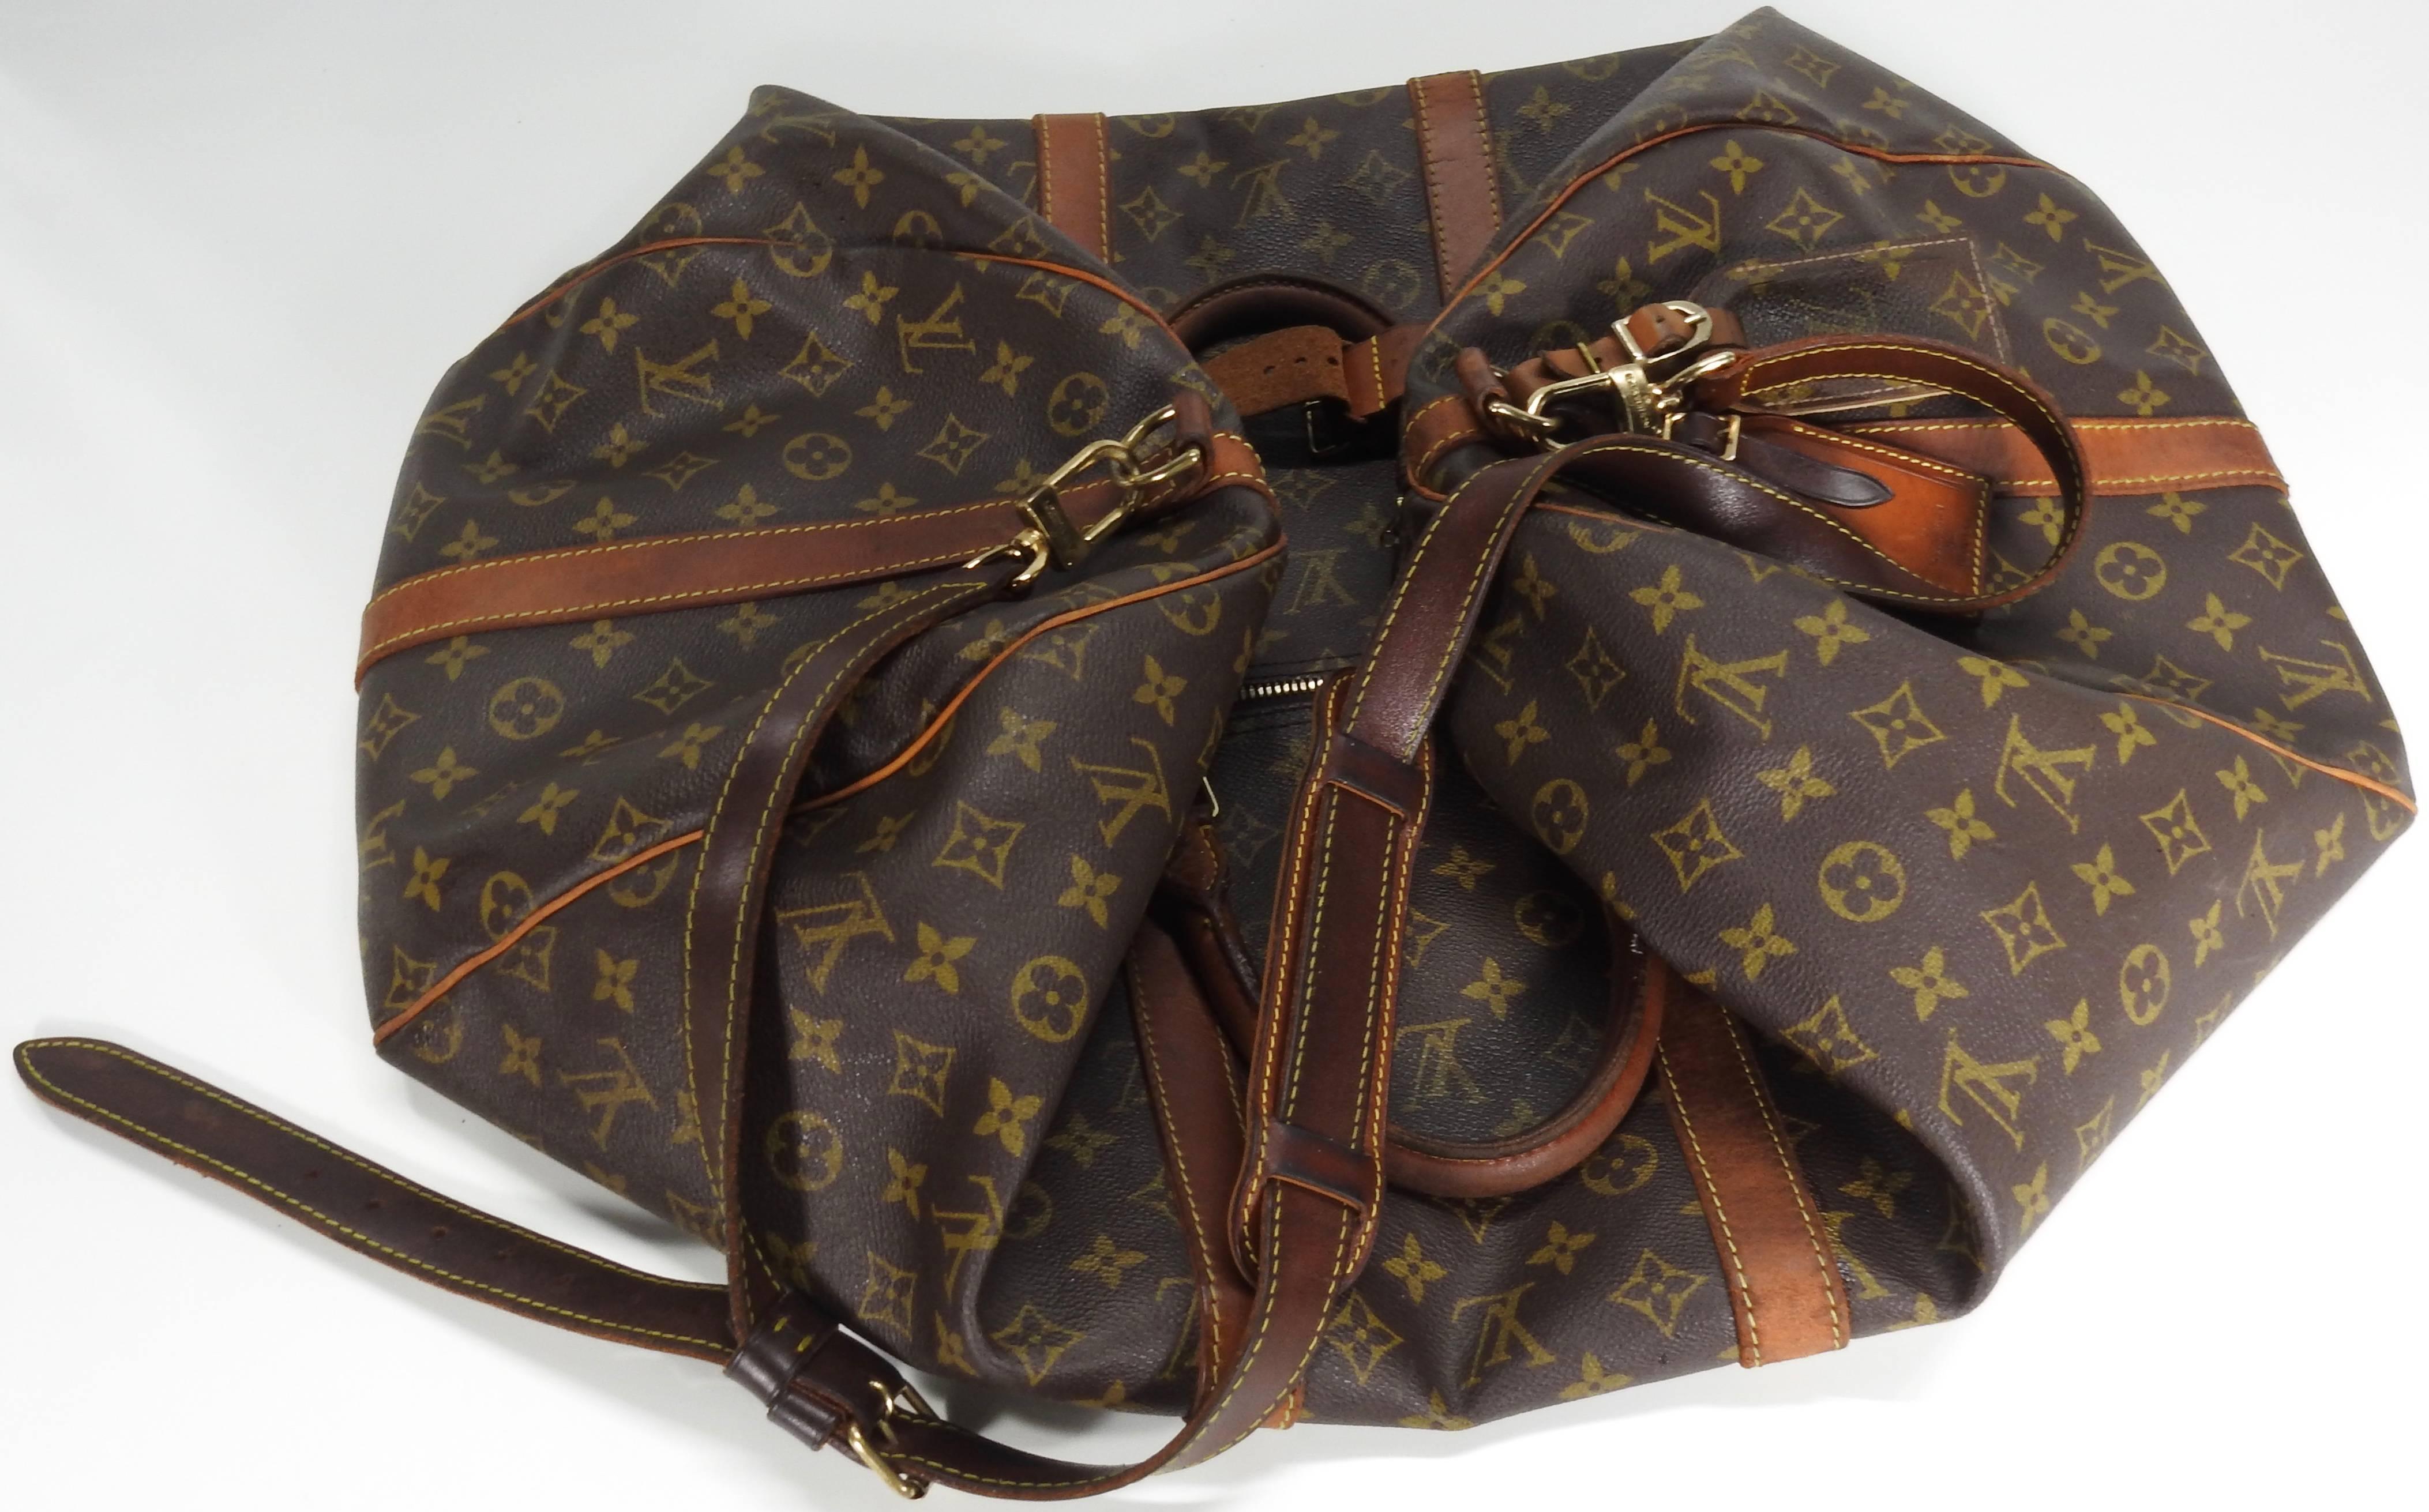 American Louis Vuitton Classic Keepall Leather Monogram Travel Bag For Sale